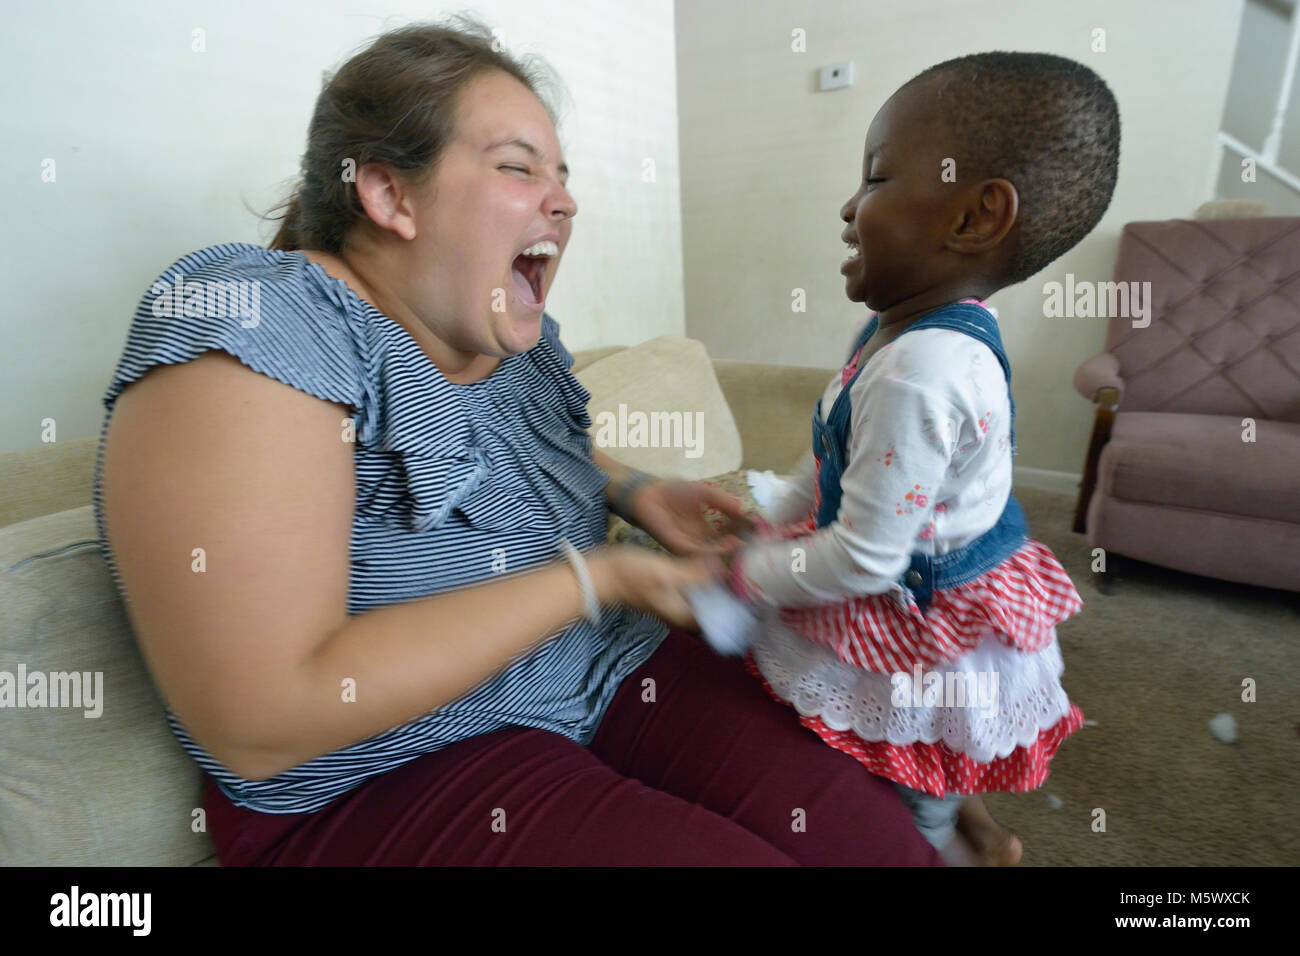 Krista Camp, a case manager for Church World Service, plays with Rehema, a child from the Democratic Republic of the Congo, during a visit to her fami Stock Photo